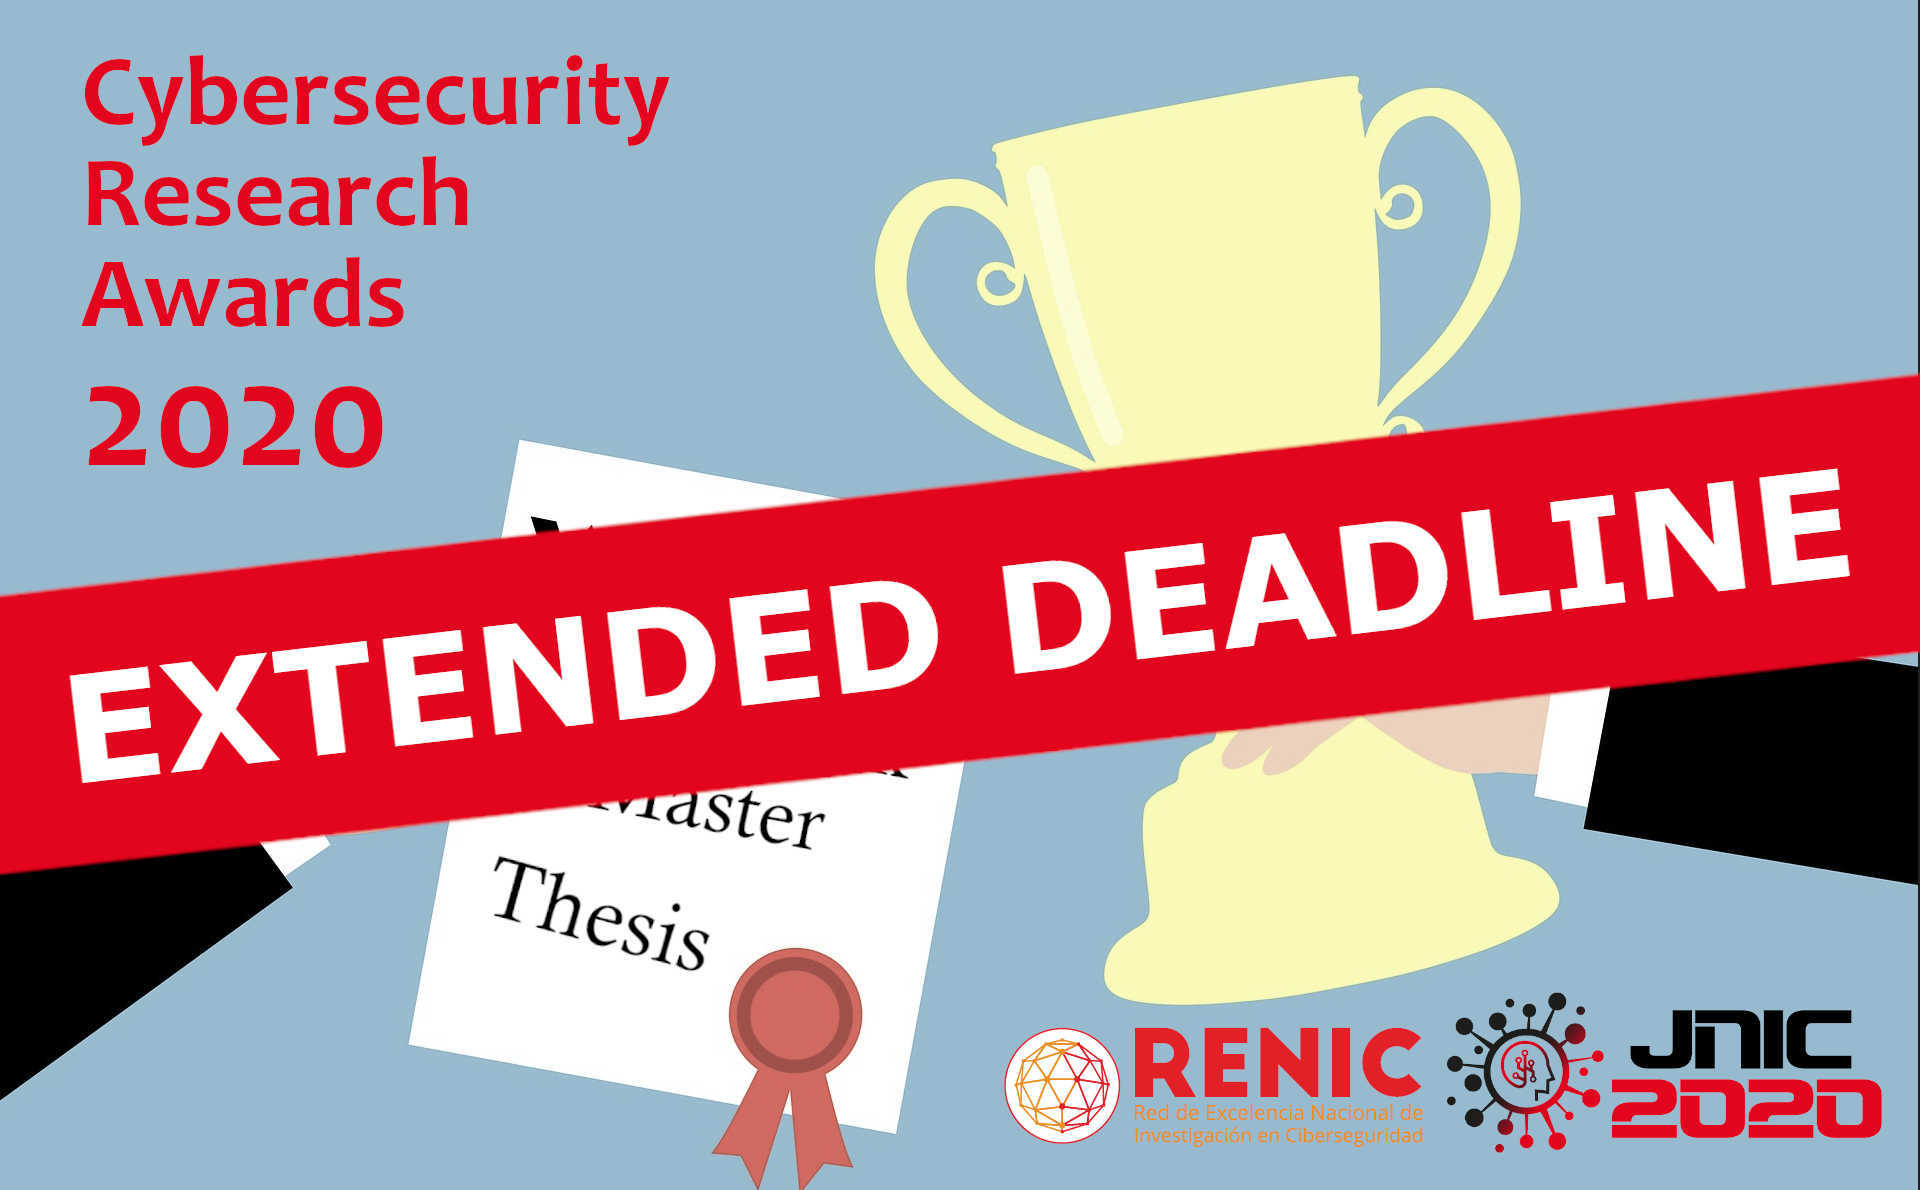 Deadline extended for Cybersecurity Research Awards 2020